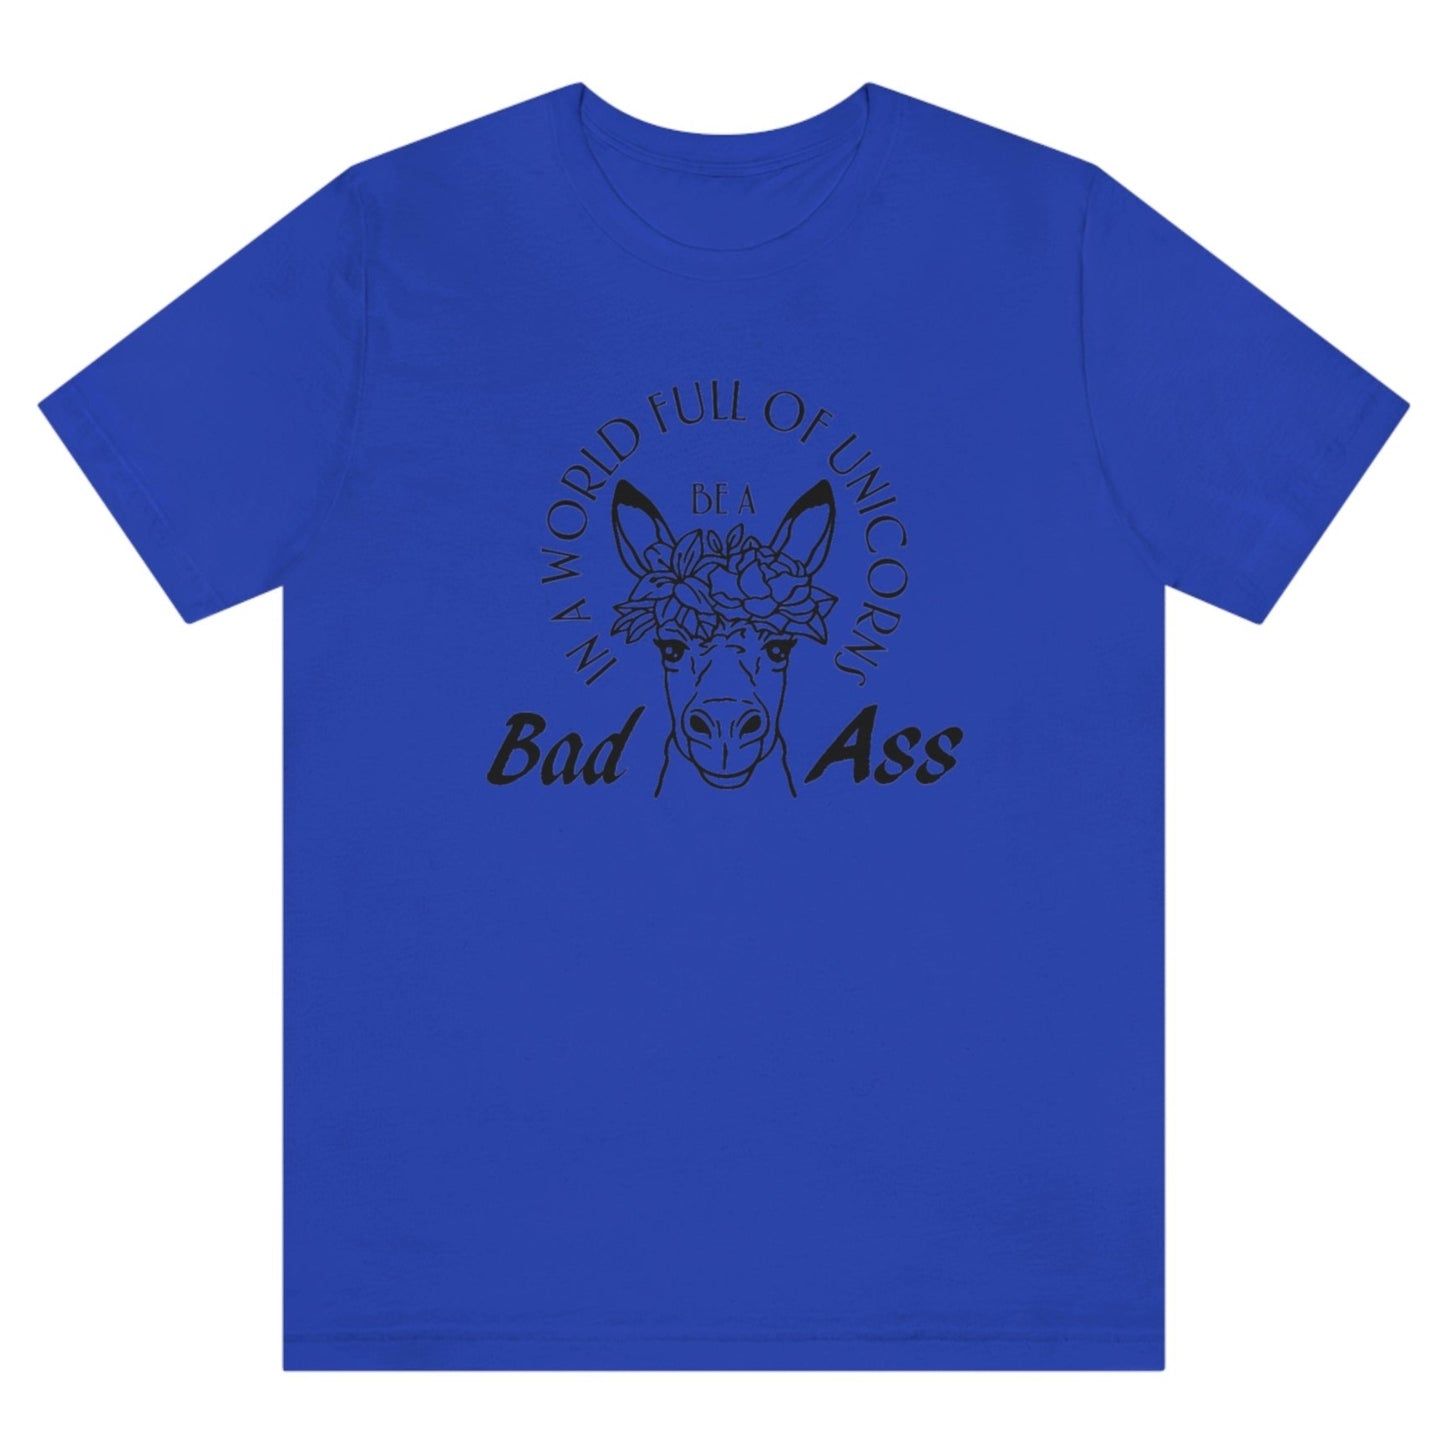 in-a-world-full-of-unicorns-be-a-bad-ass-true-royal-blue-t-shirt-womens-funny-donkey